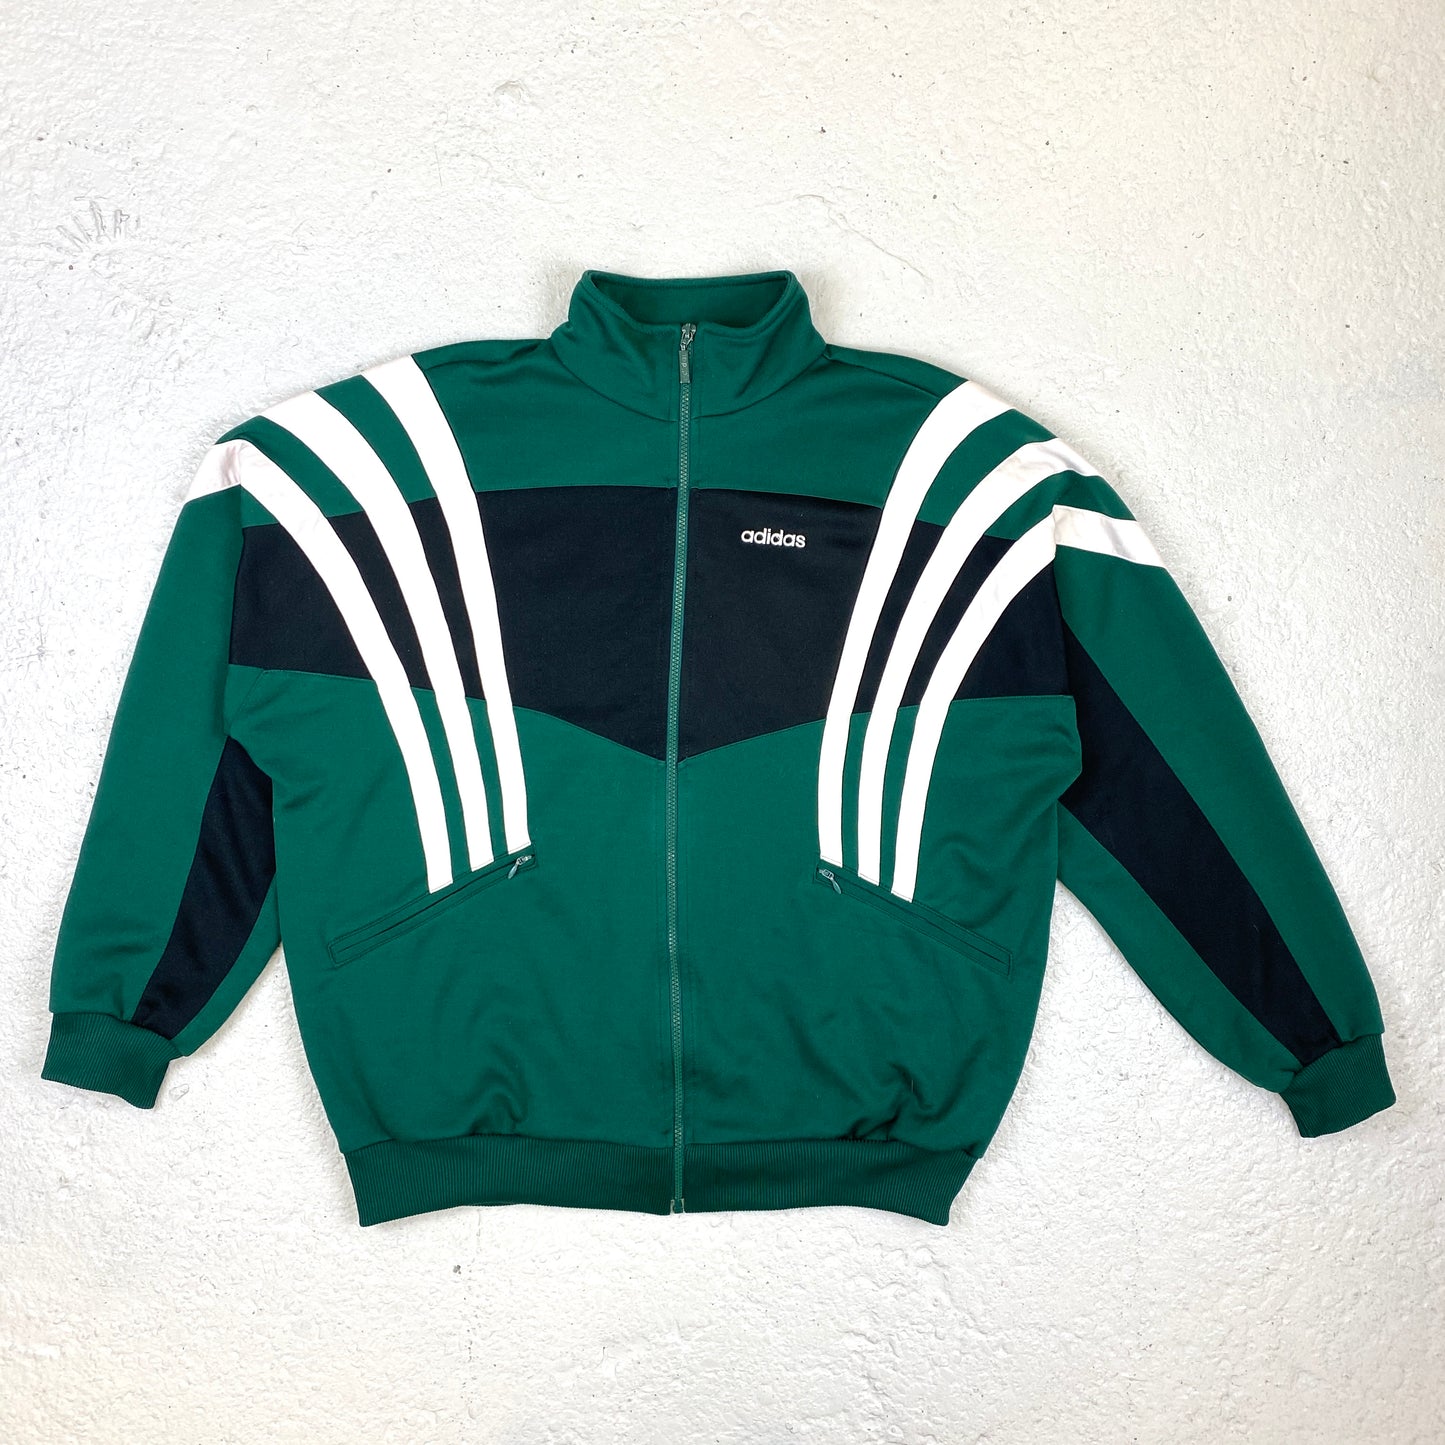 Adidas RARE embroidered zip sweater (L-XL)